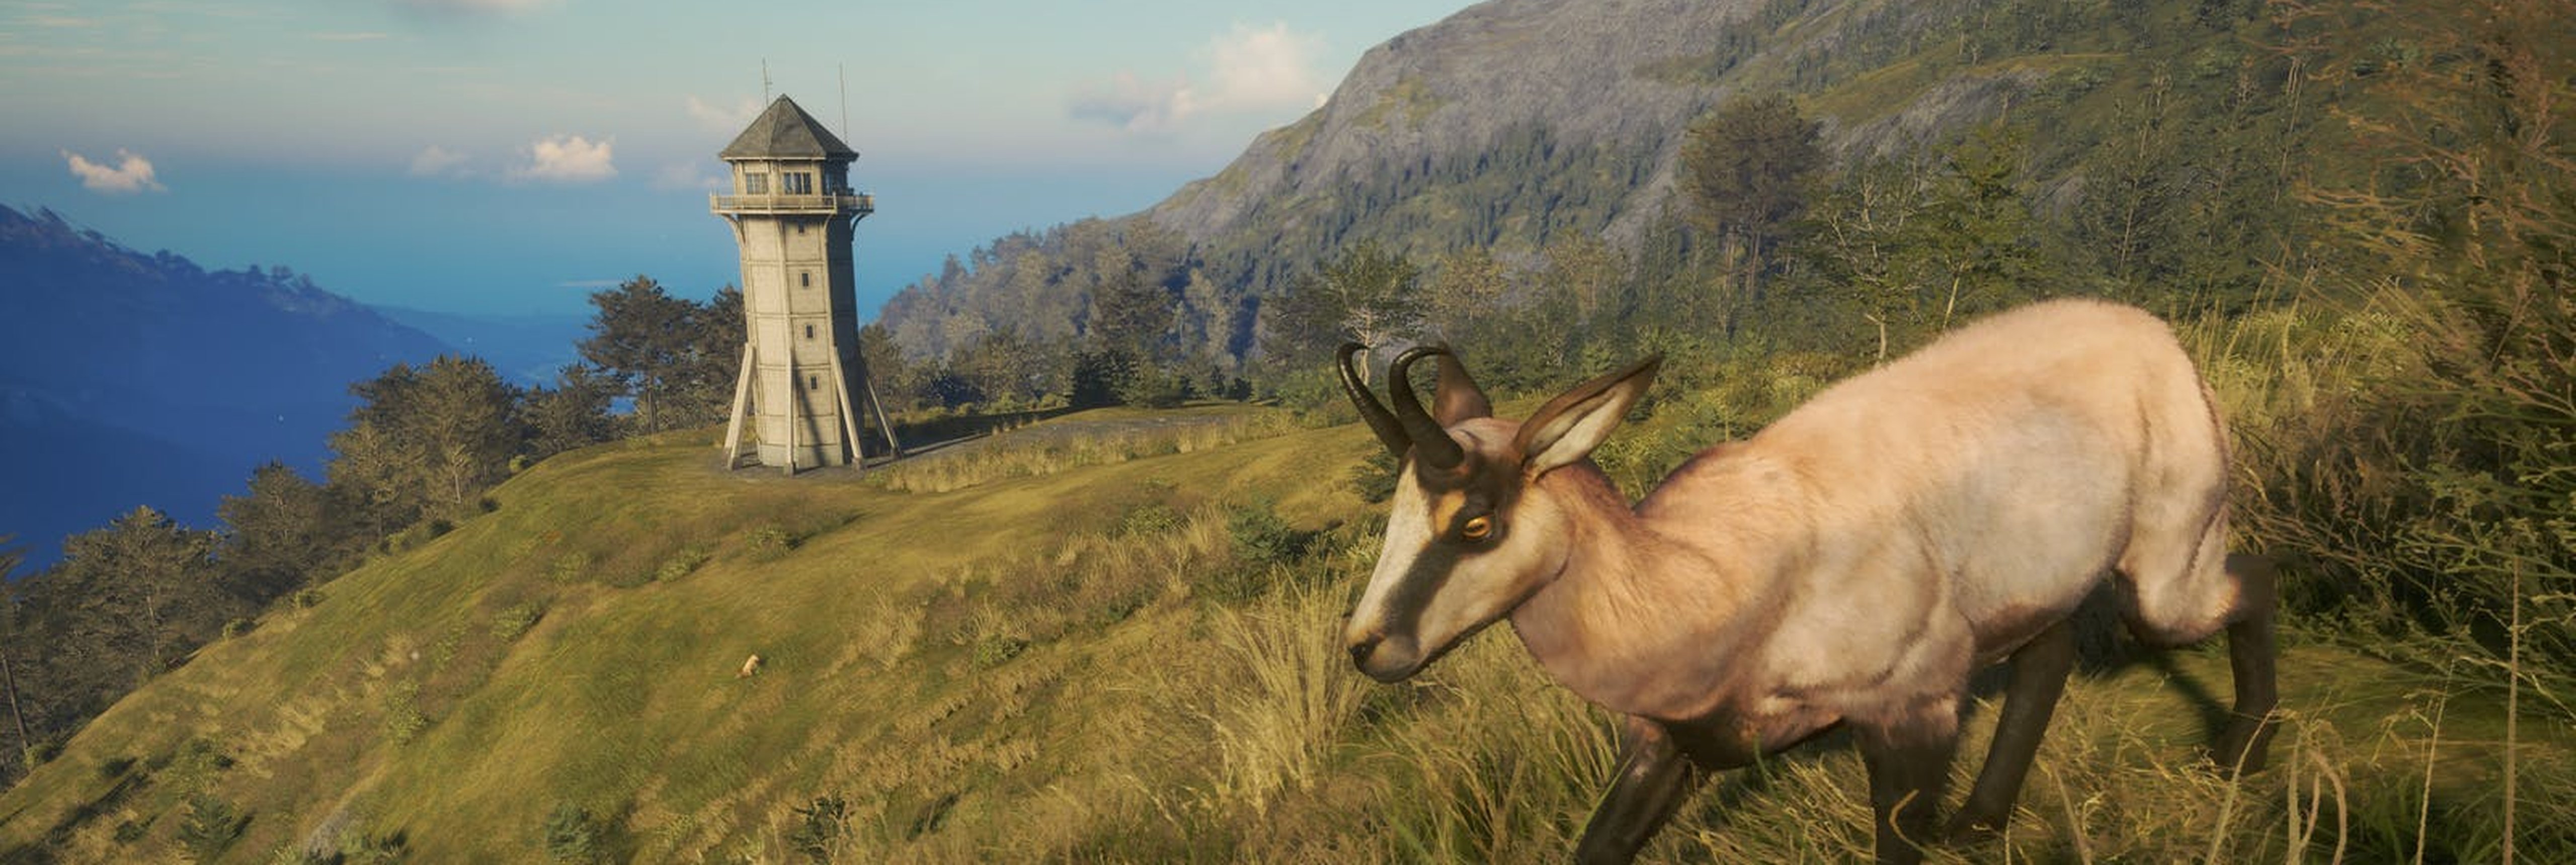 theHunter: Call of the Wild at the best price